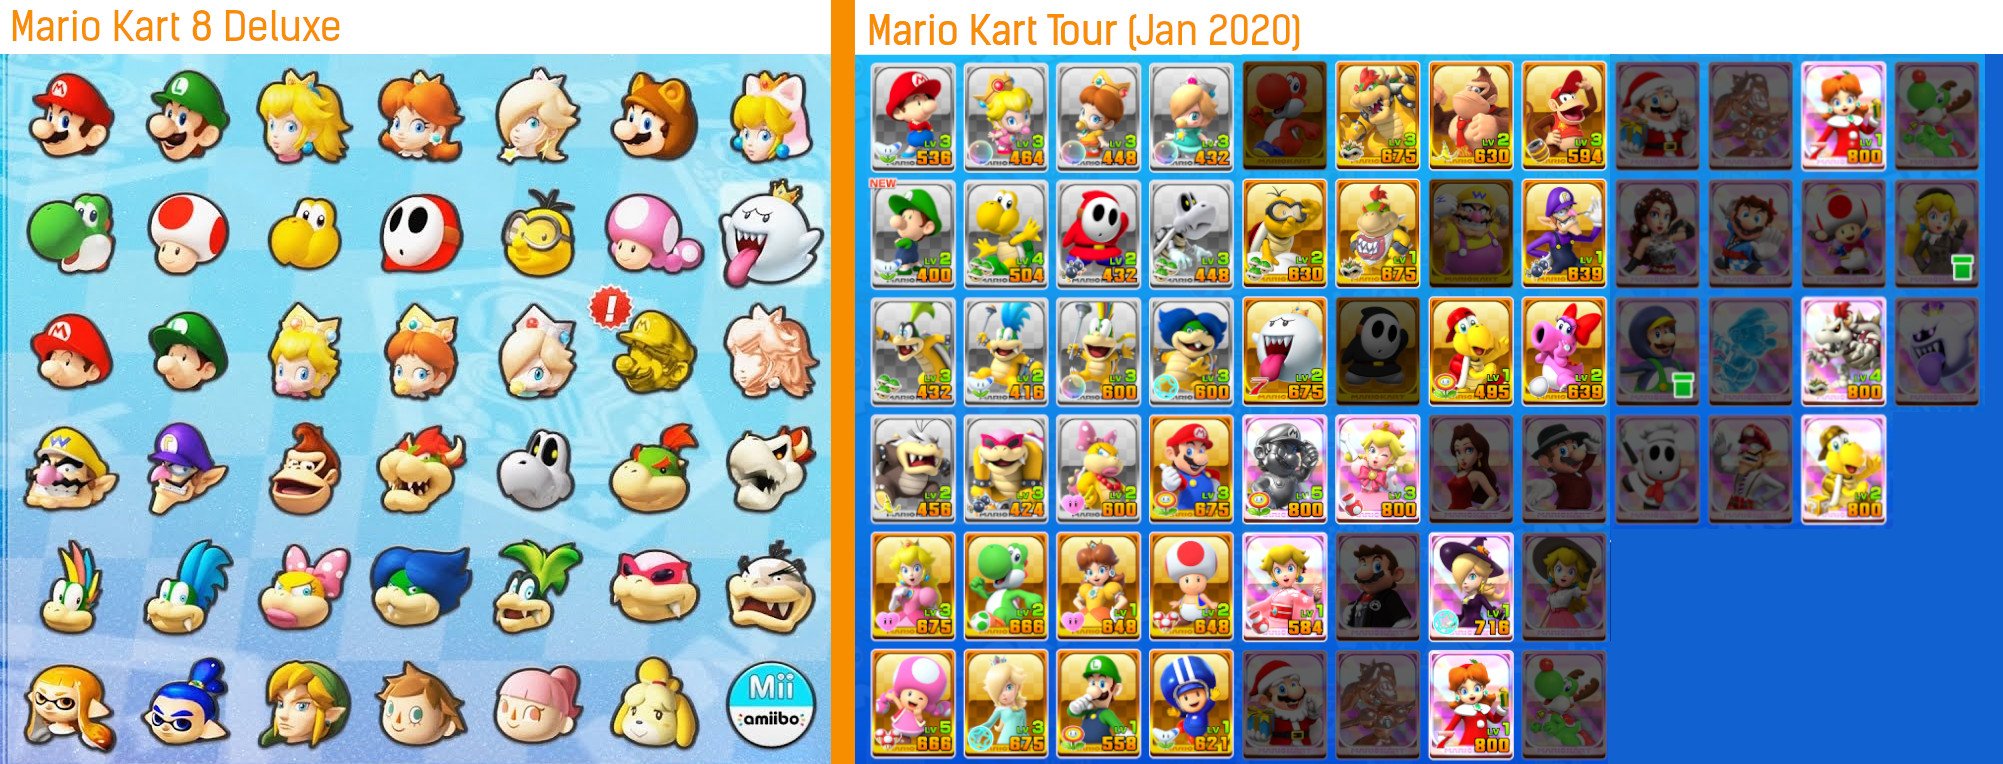 Mario Kart Tour Now Has As Many Available Characters As 8 Deluxe Vgc